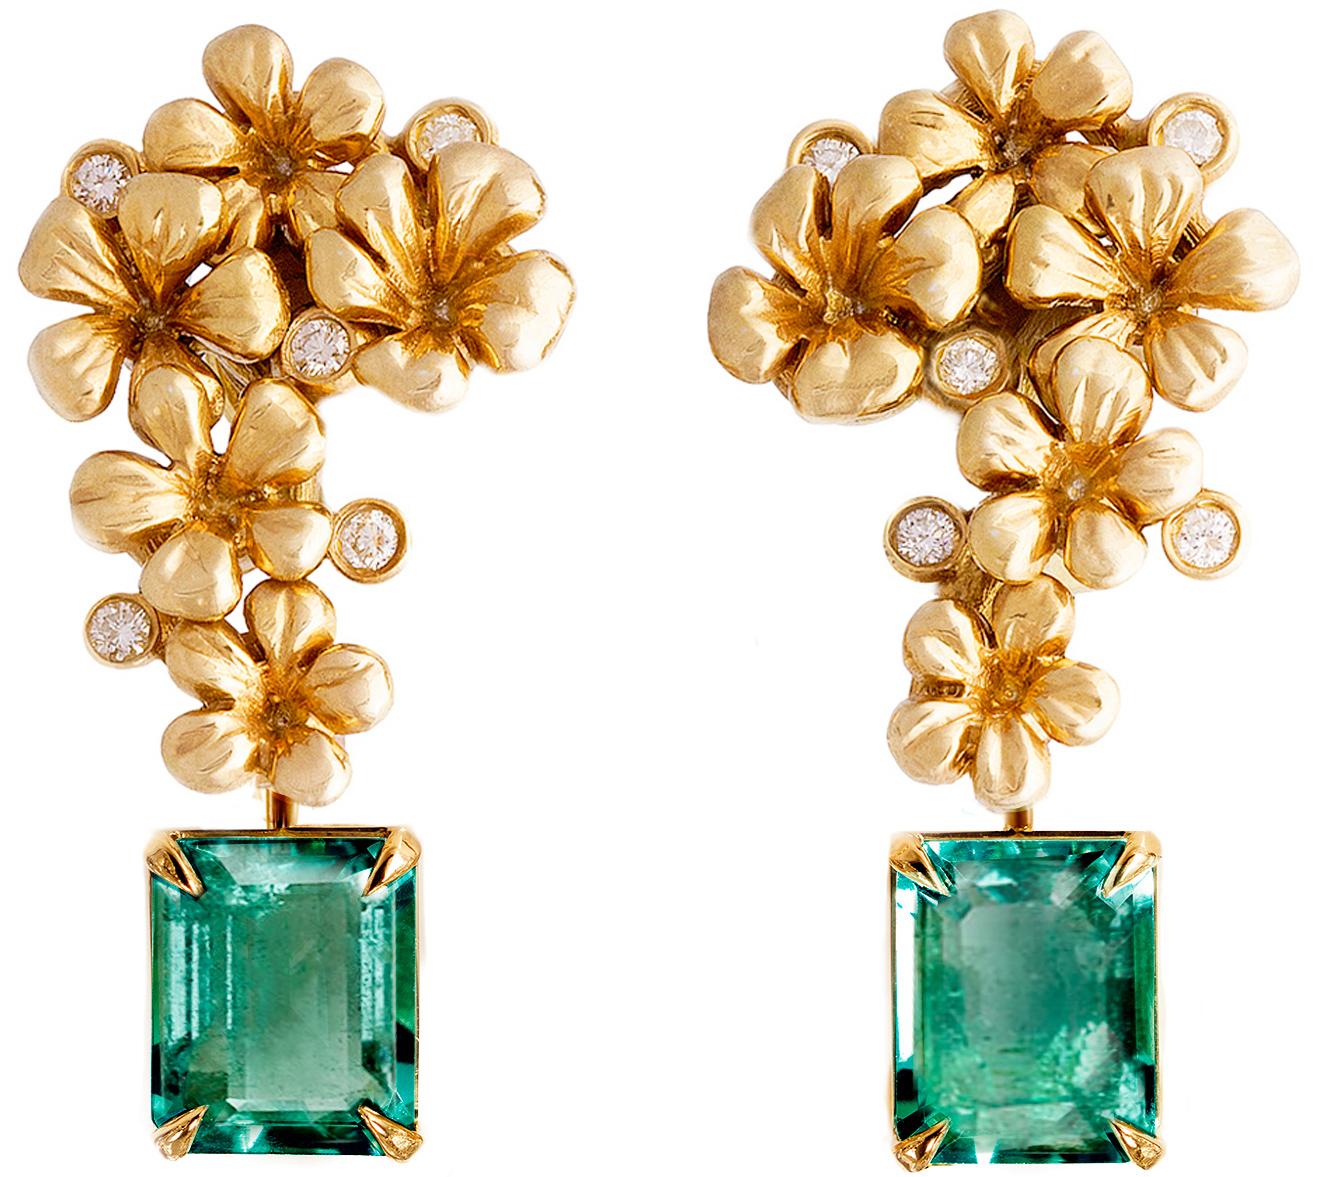 These modern-style 18-karat yellow gold cocktail clip-on earrings are encrusted with 10 round diamonds and detachable natural emeralds, totaling 3.85 carats and measuring 0.35 x 0.23 inches / 8.5 x 6.7 mm each. This jewelry collection was featured